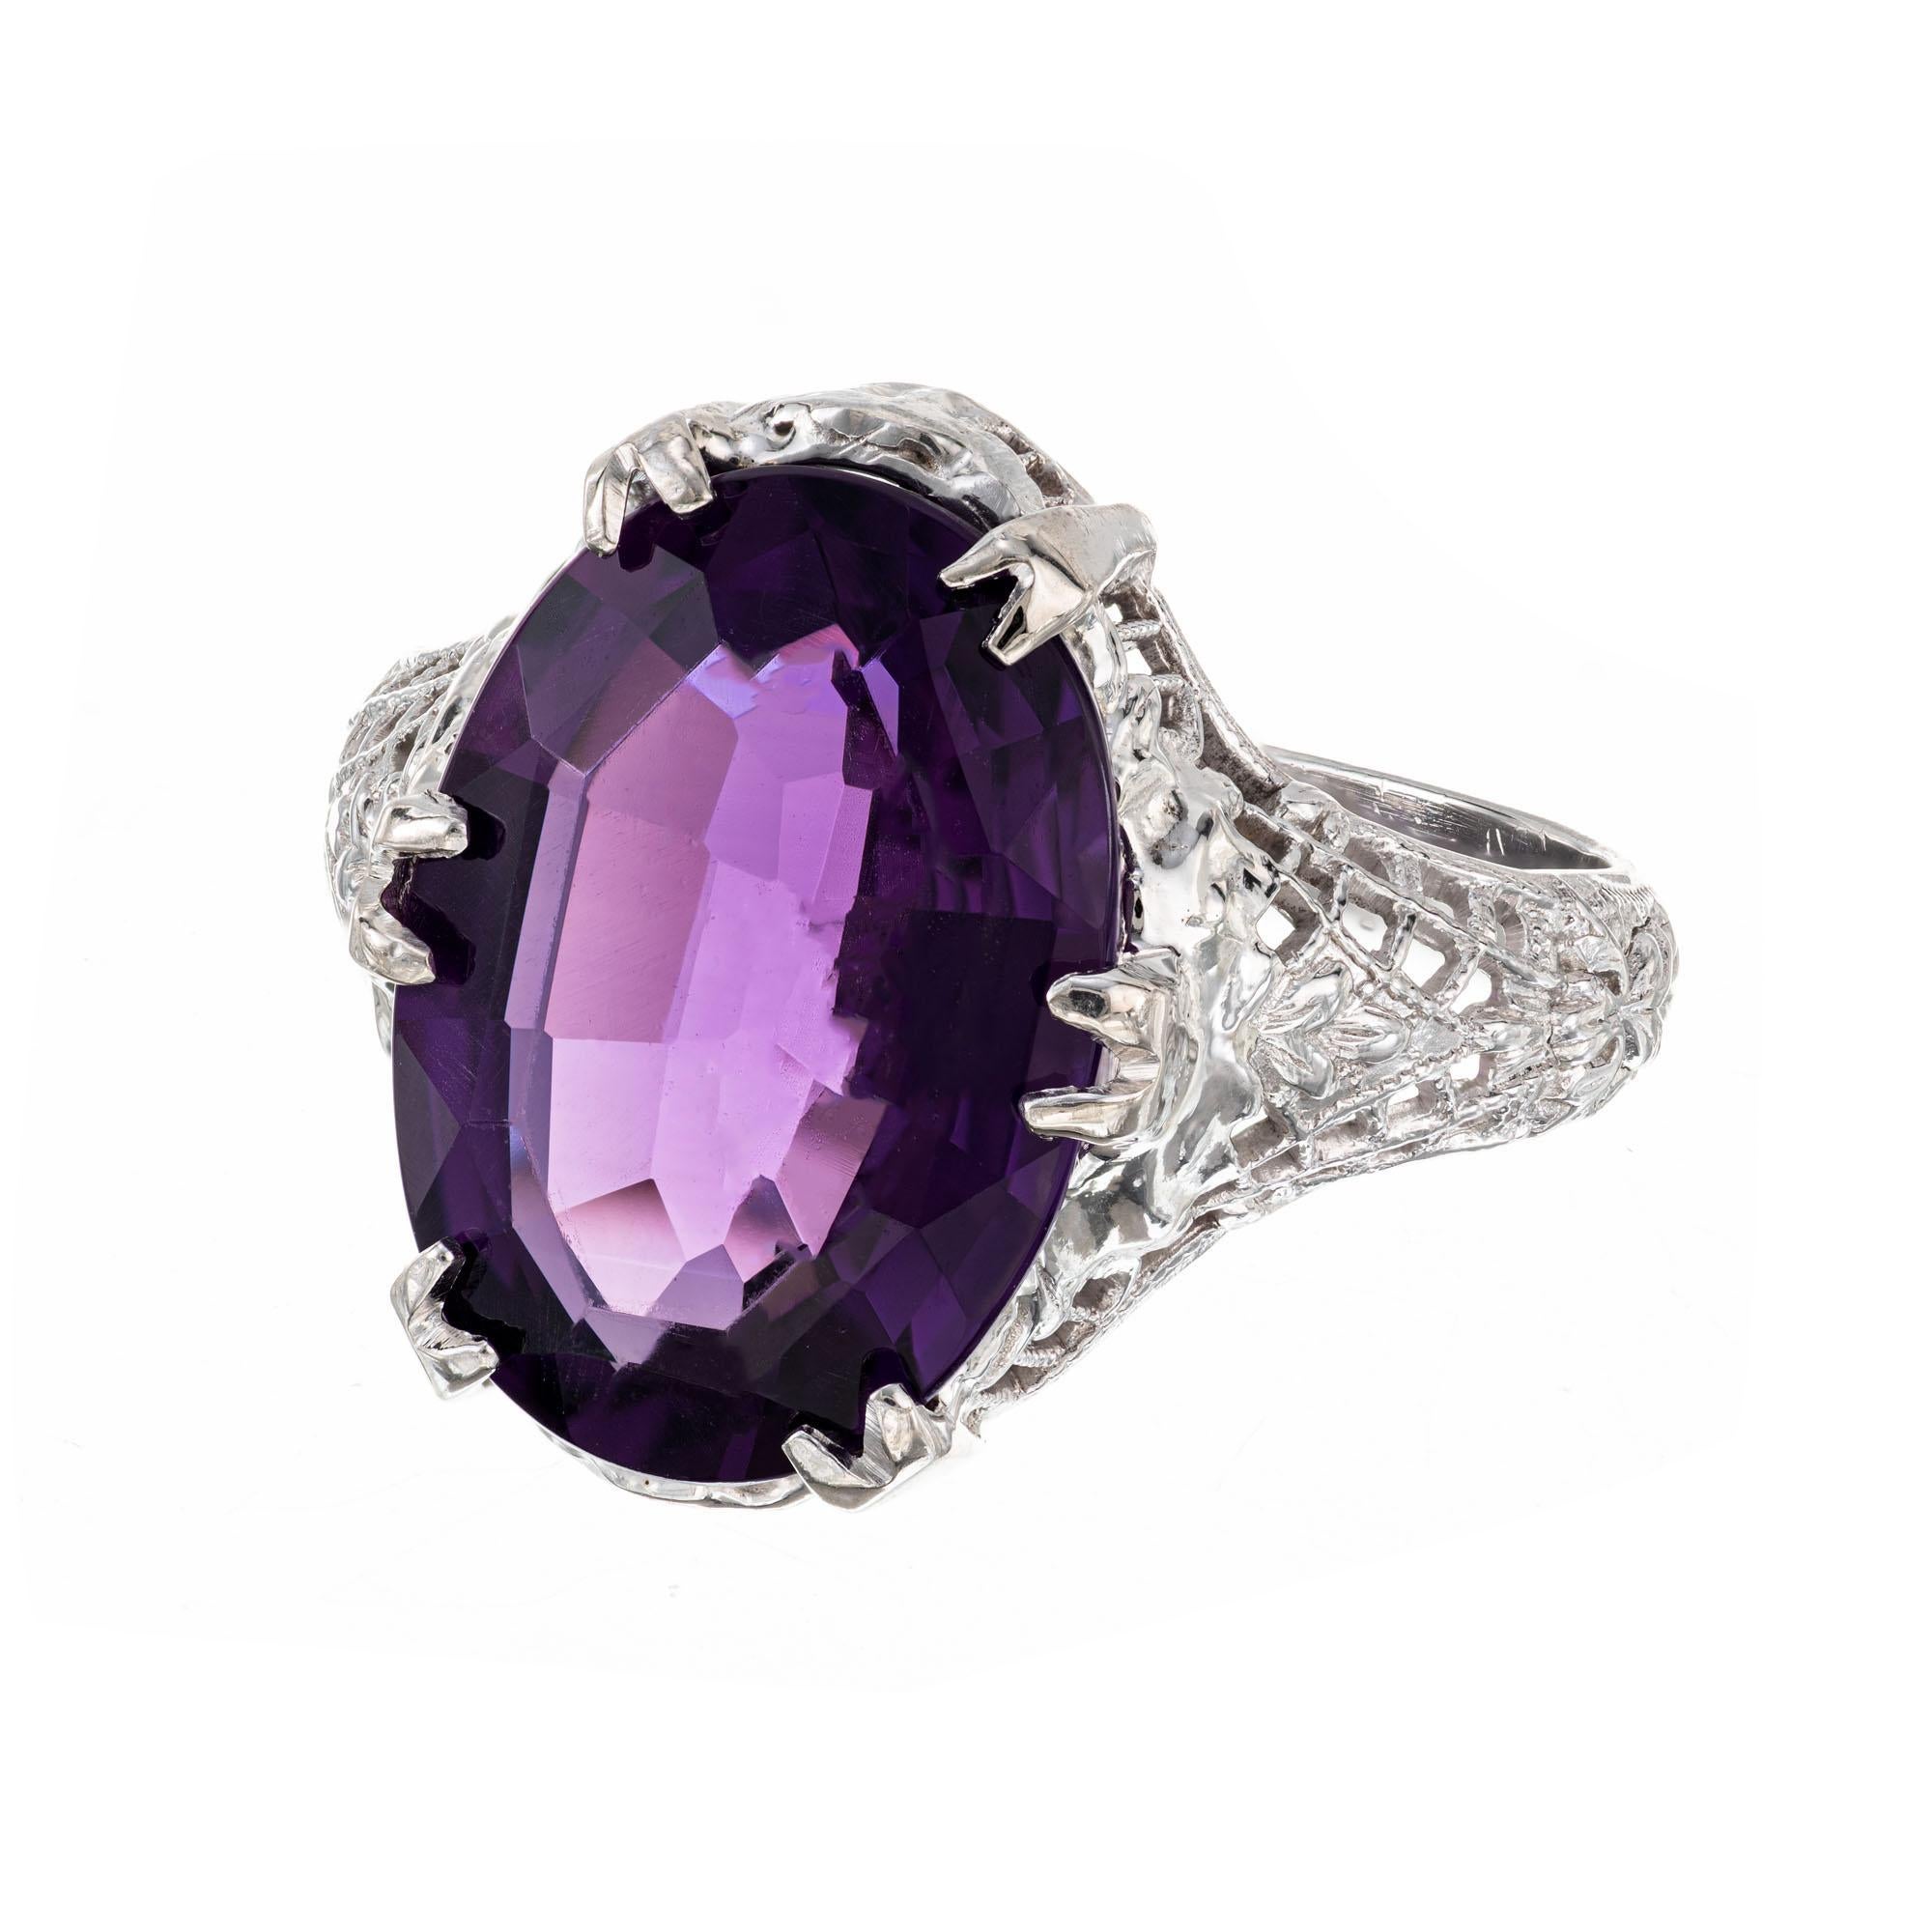 5.00 Carat Oval Bright Purple Amethyst Filigree Gold Ring In Good Condition For Sale In Stamford, CT